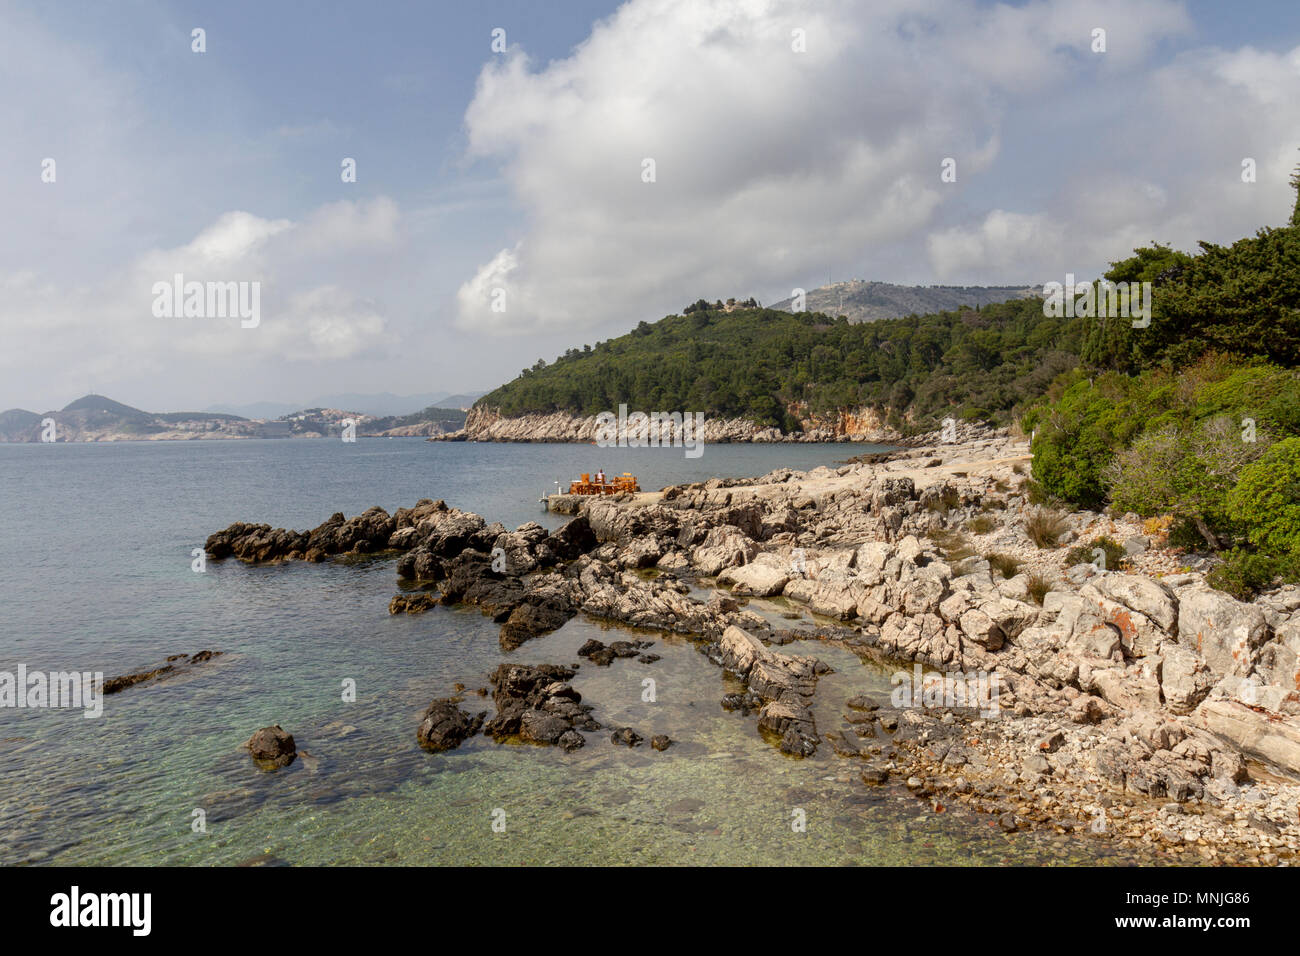 Rocky outcrops on the southern end of Lokrum Island, in the Adriatic Sea off Dubrovnik, Croatia. Stock Photo